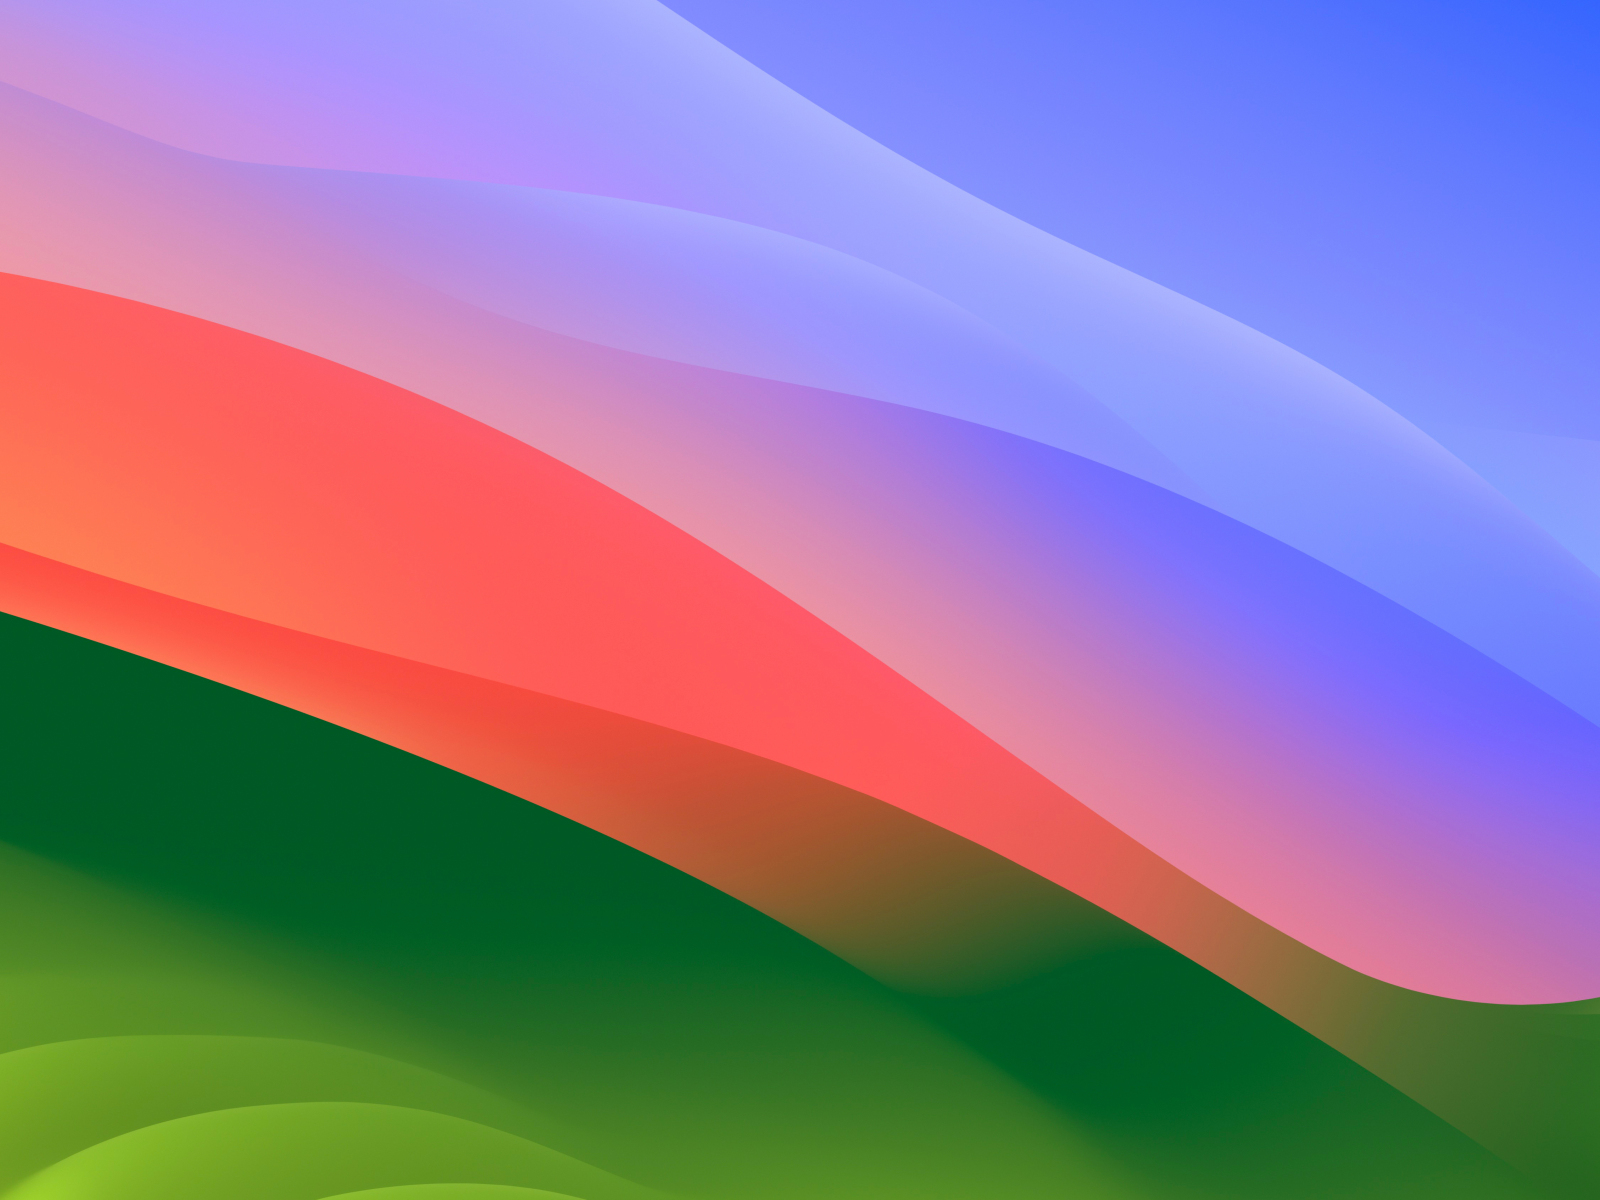 MacOS Sonoma, colorful waves, stock photo, 1600x1200 wallpaper